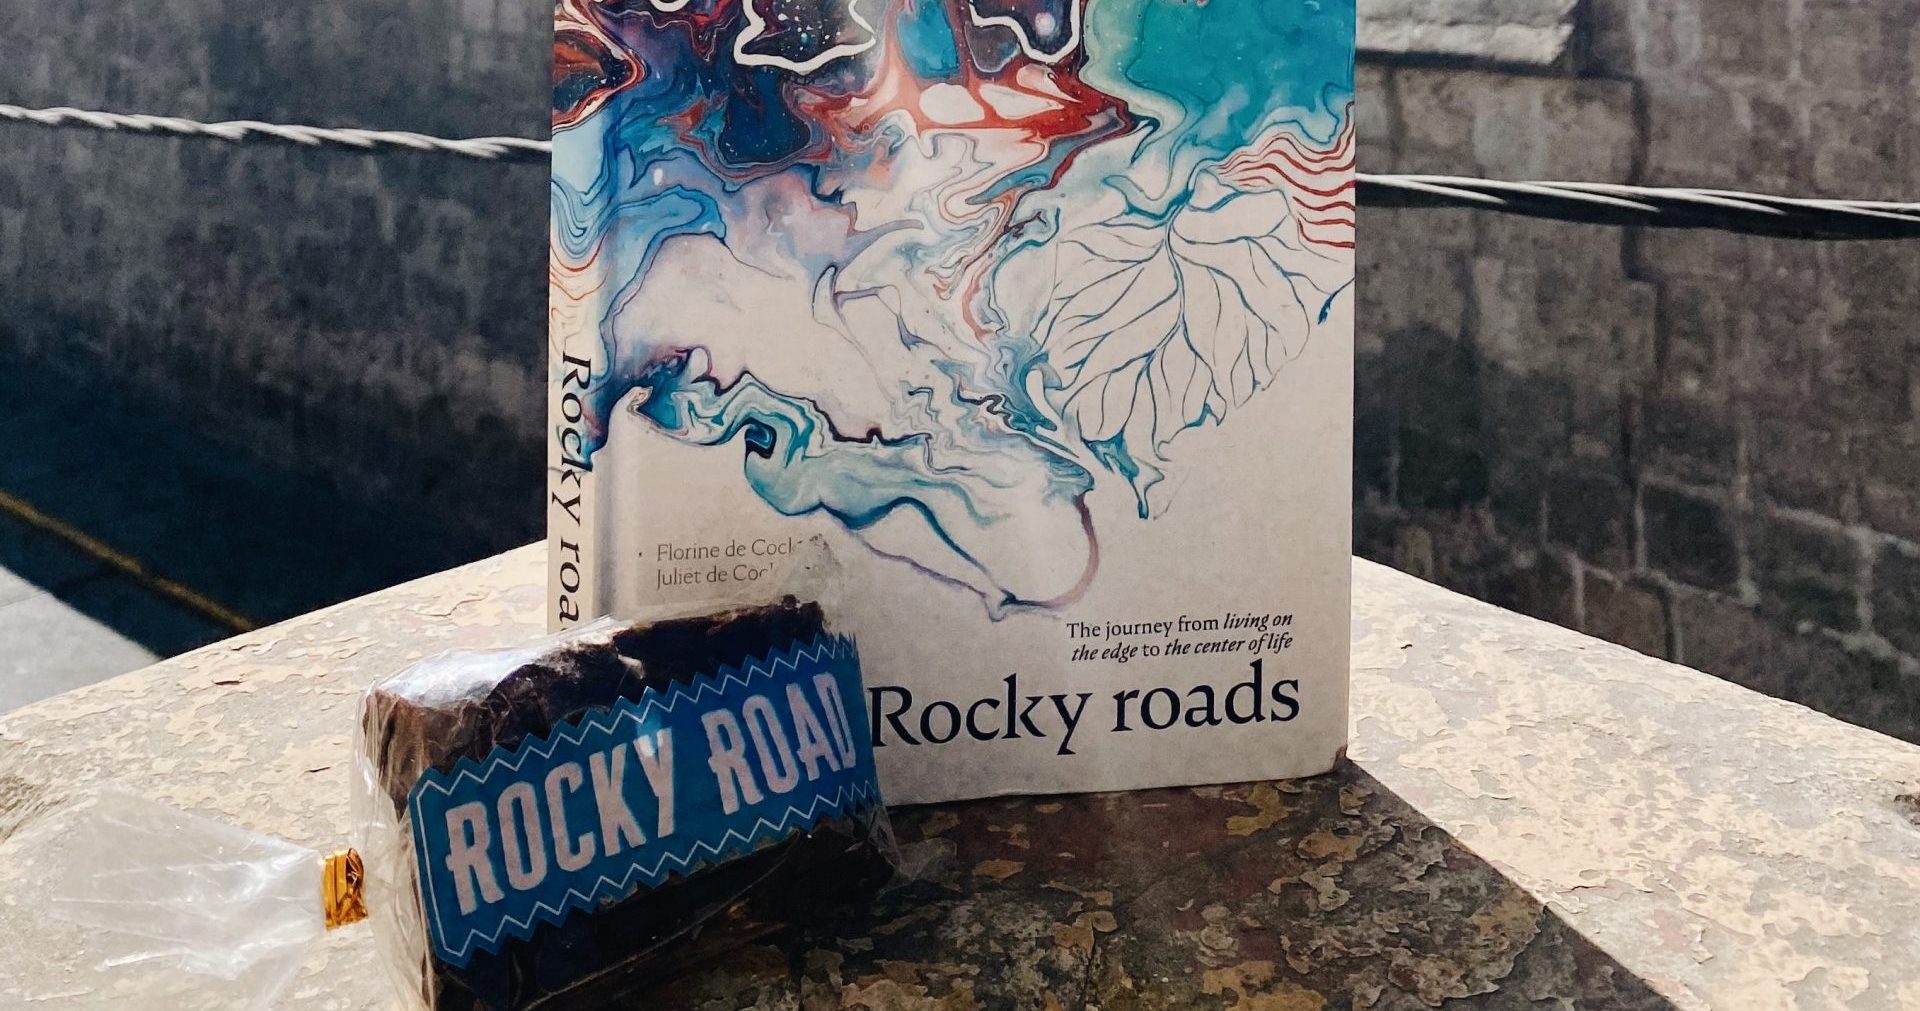 Rocky roads the book and rocky road the chocolate…